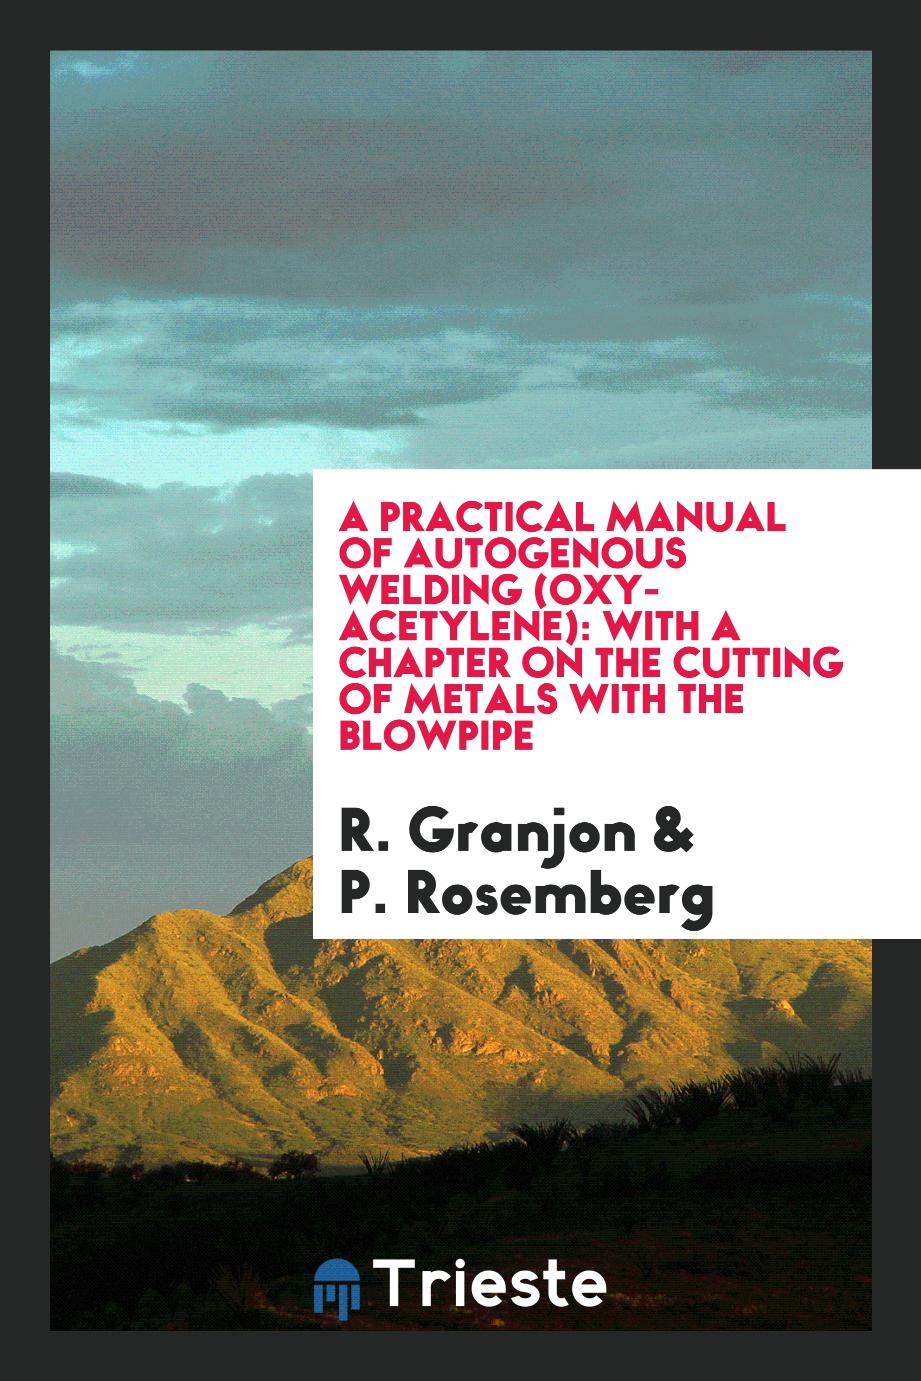 A practical manual of autogenous welding (oxy-acetylene): with a chapter on the cutting of metals with the blowpipe